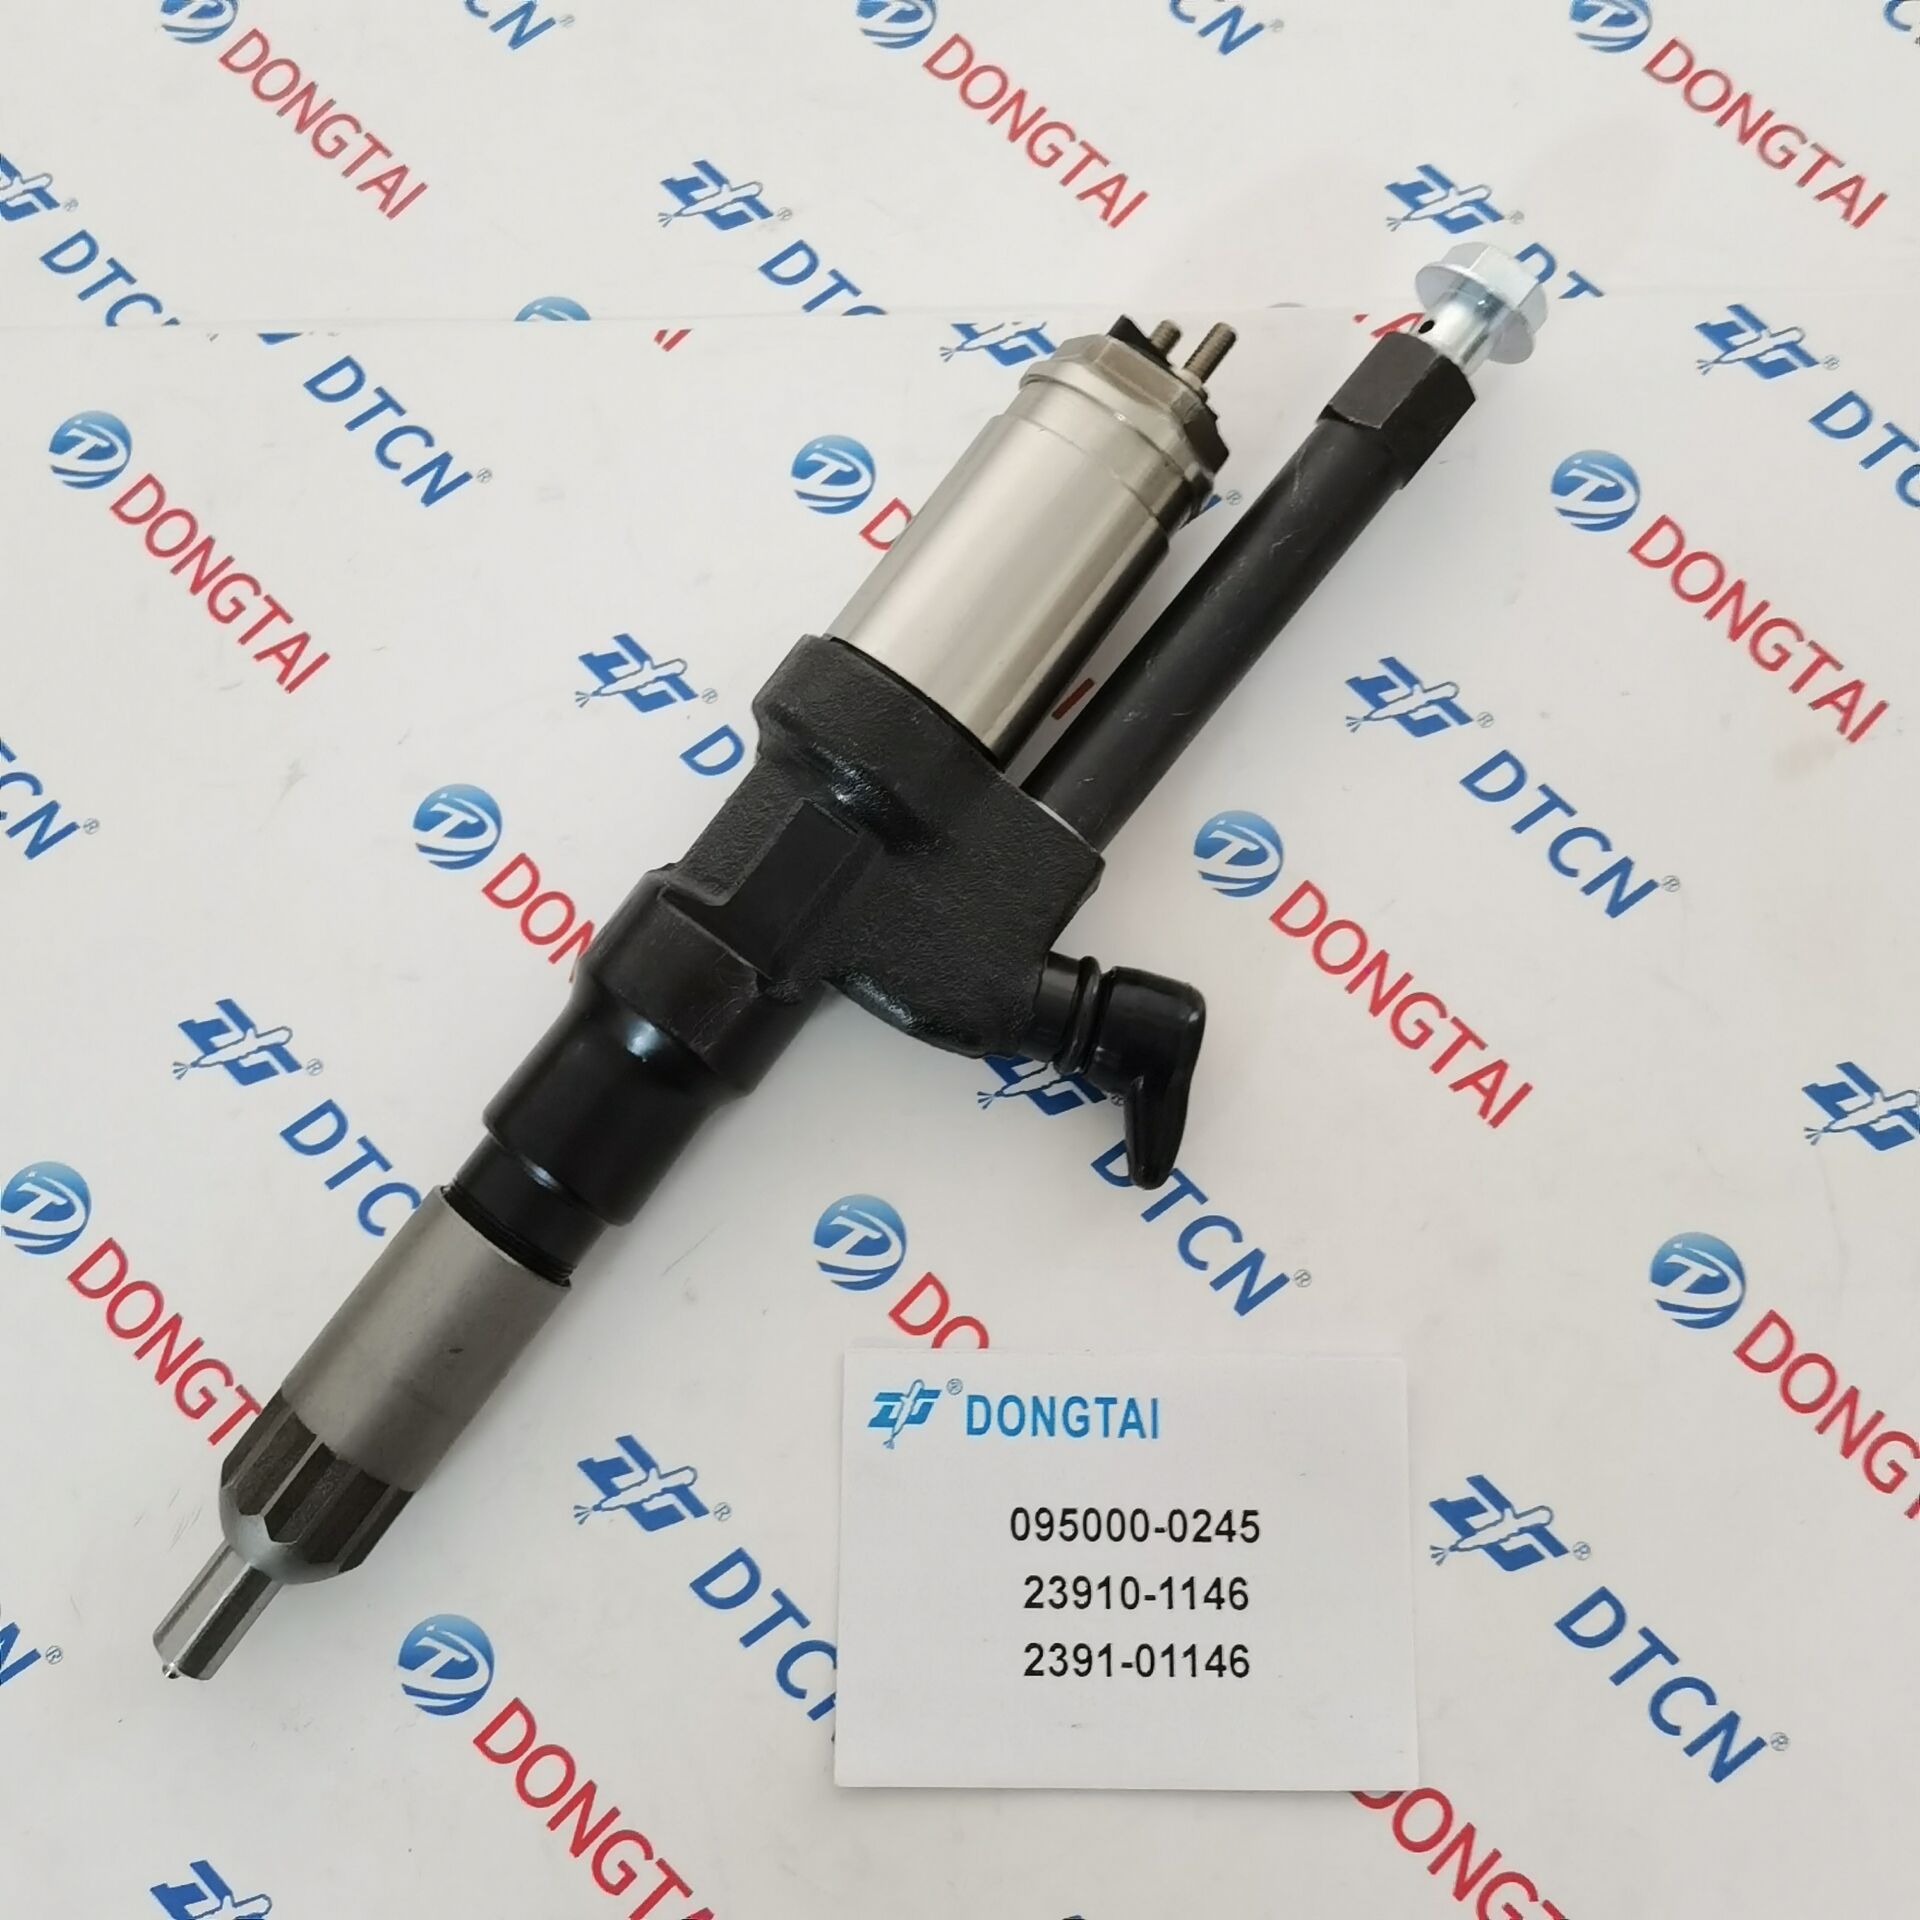 095000-0245 23910-1146 2391-01146 DENSO Common Rail Injector 095000-0245 23910-1146 2391-01146 Injector for Hino K13C Engine